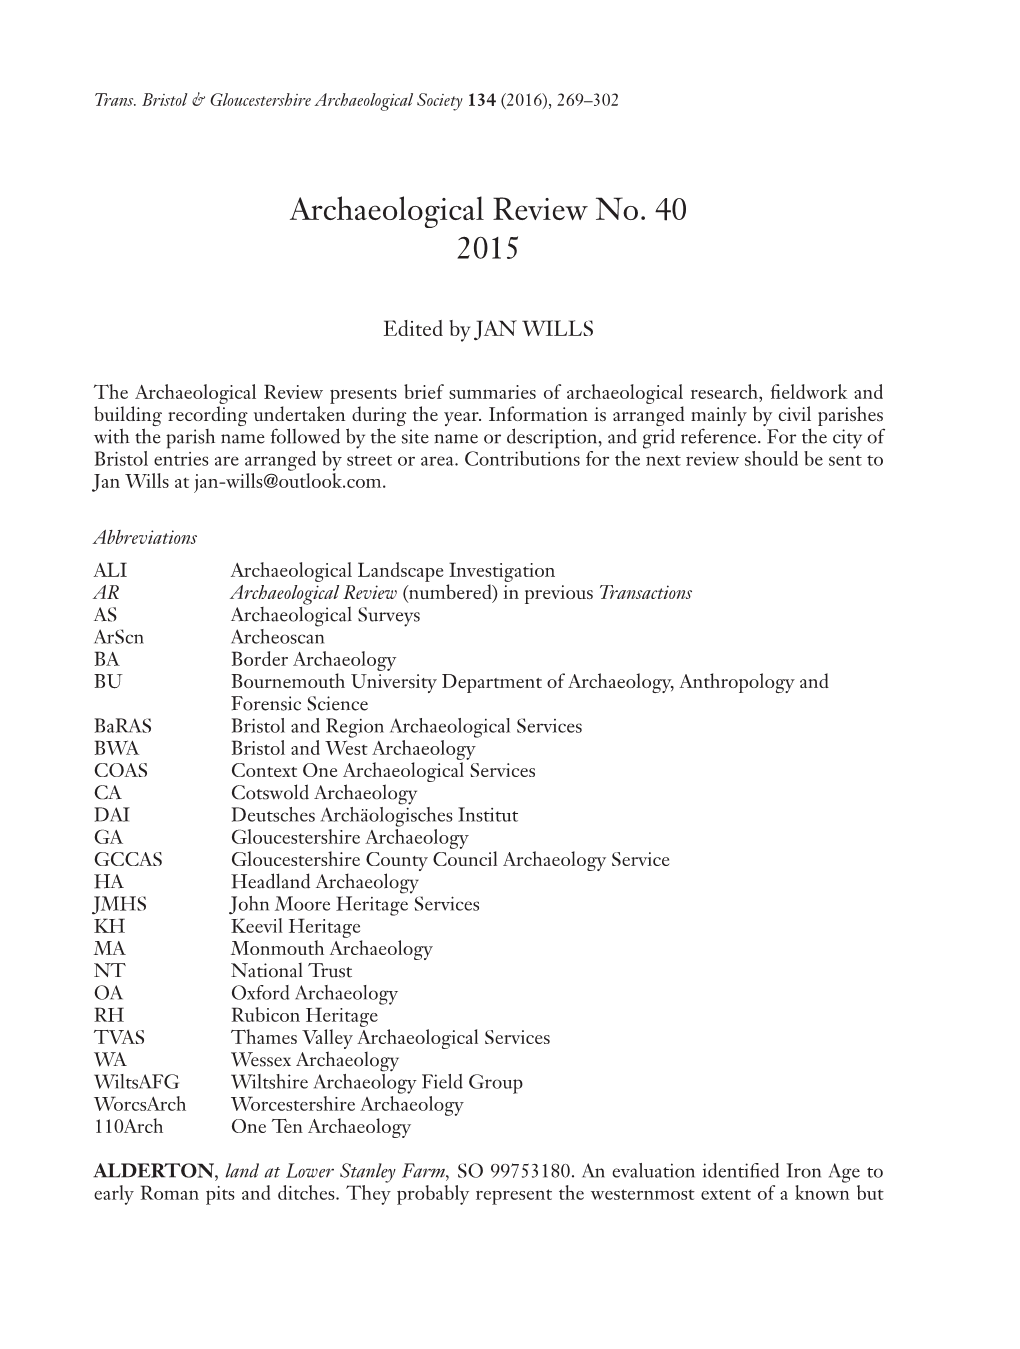 Archaeological Review No. 40 2015